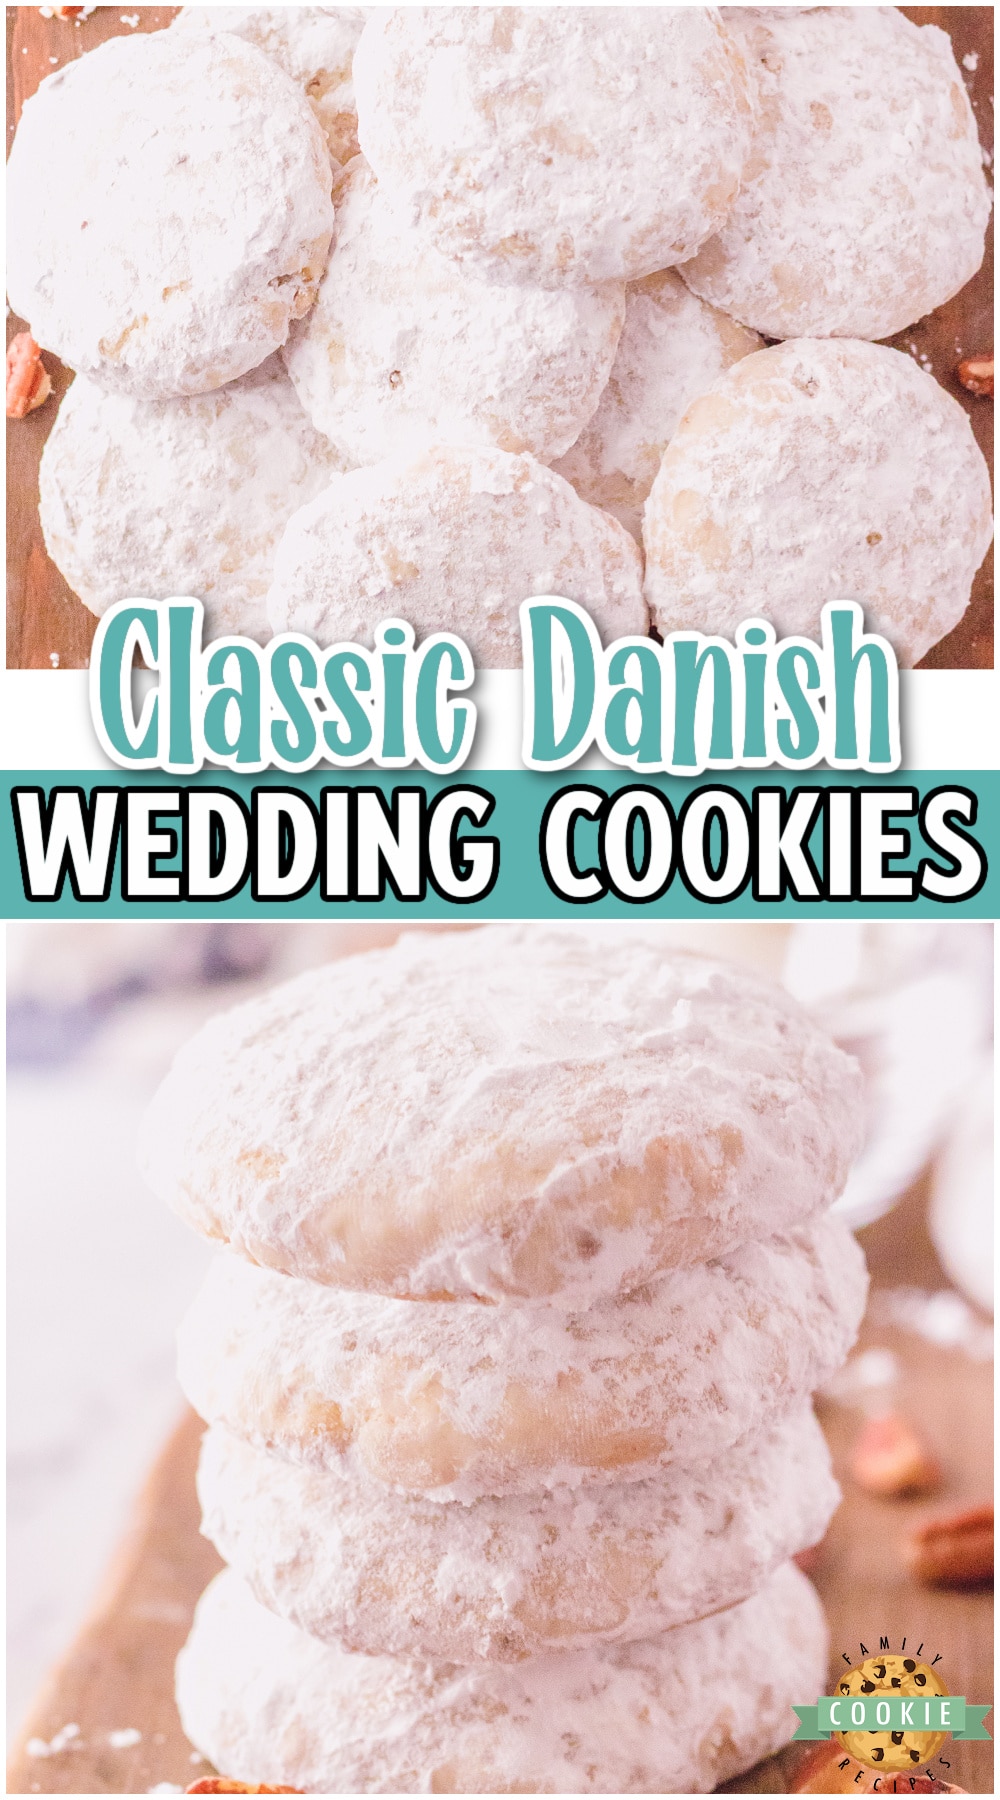 Classic Danish Wedding Cookies made with flour, butter, pecans & powdered sugar! Simple buttery cookie ball rolled in powdered sugar with just a touch of warm cinnamon flavor. Perfect for butter pecan lovers!  via @buttergirls